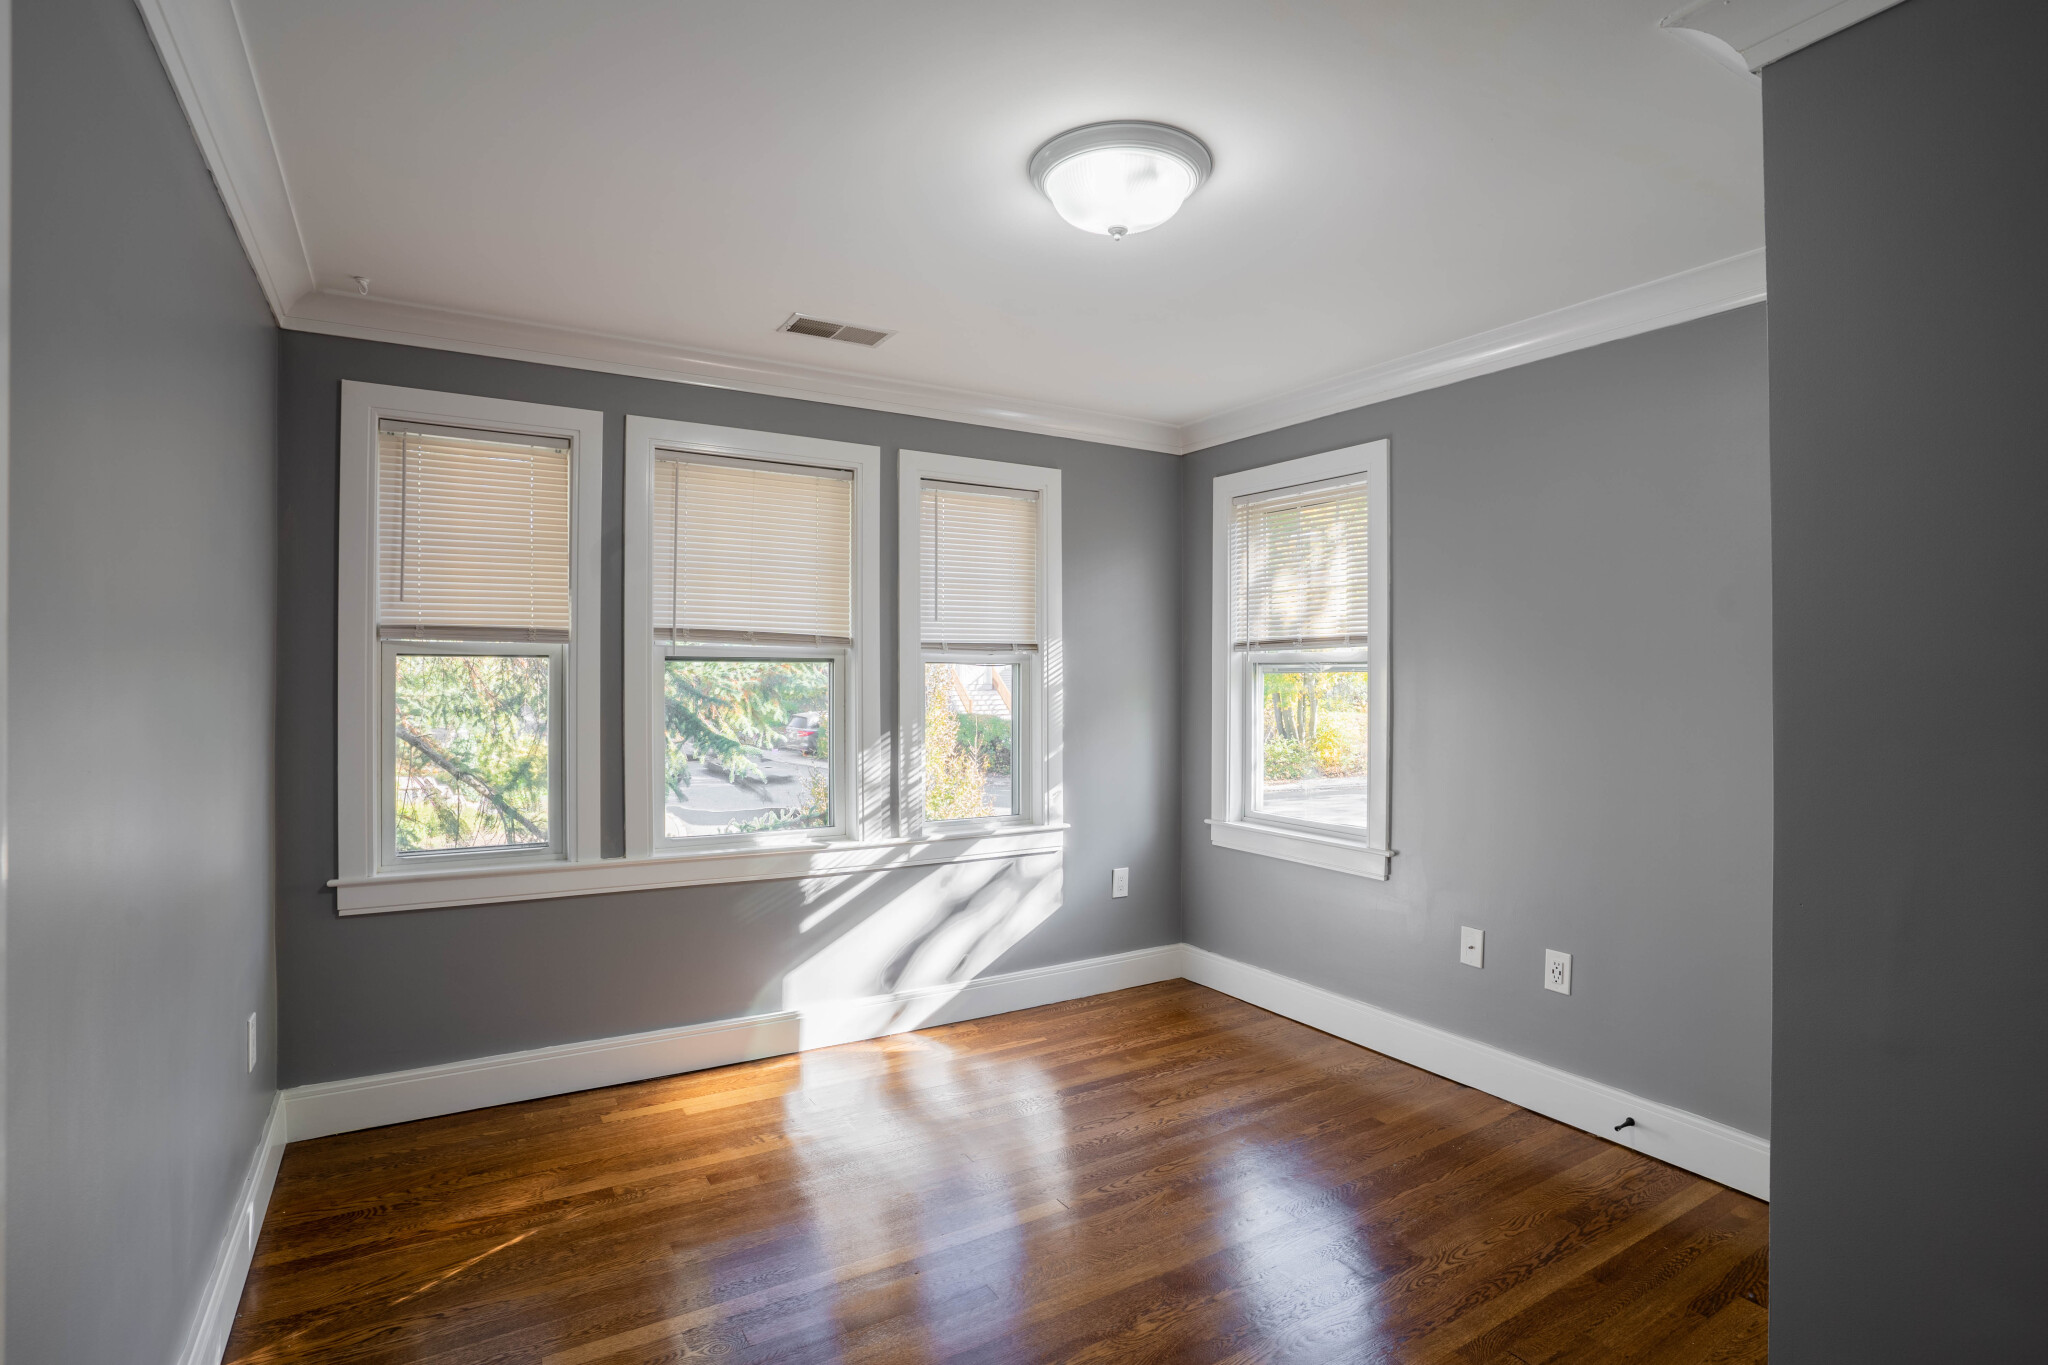 Photos of apartment on Nottinghill Rd.,Boston MA 02135